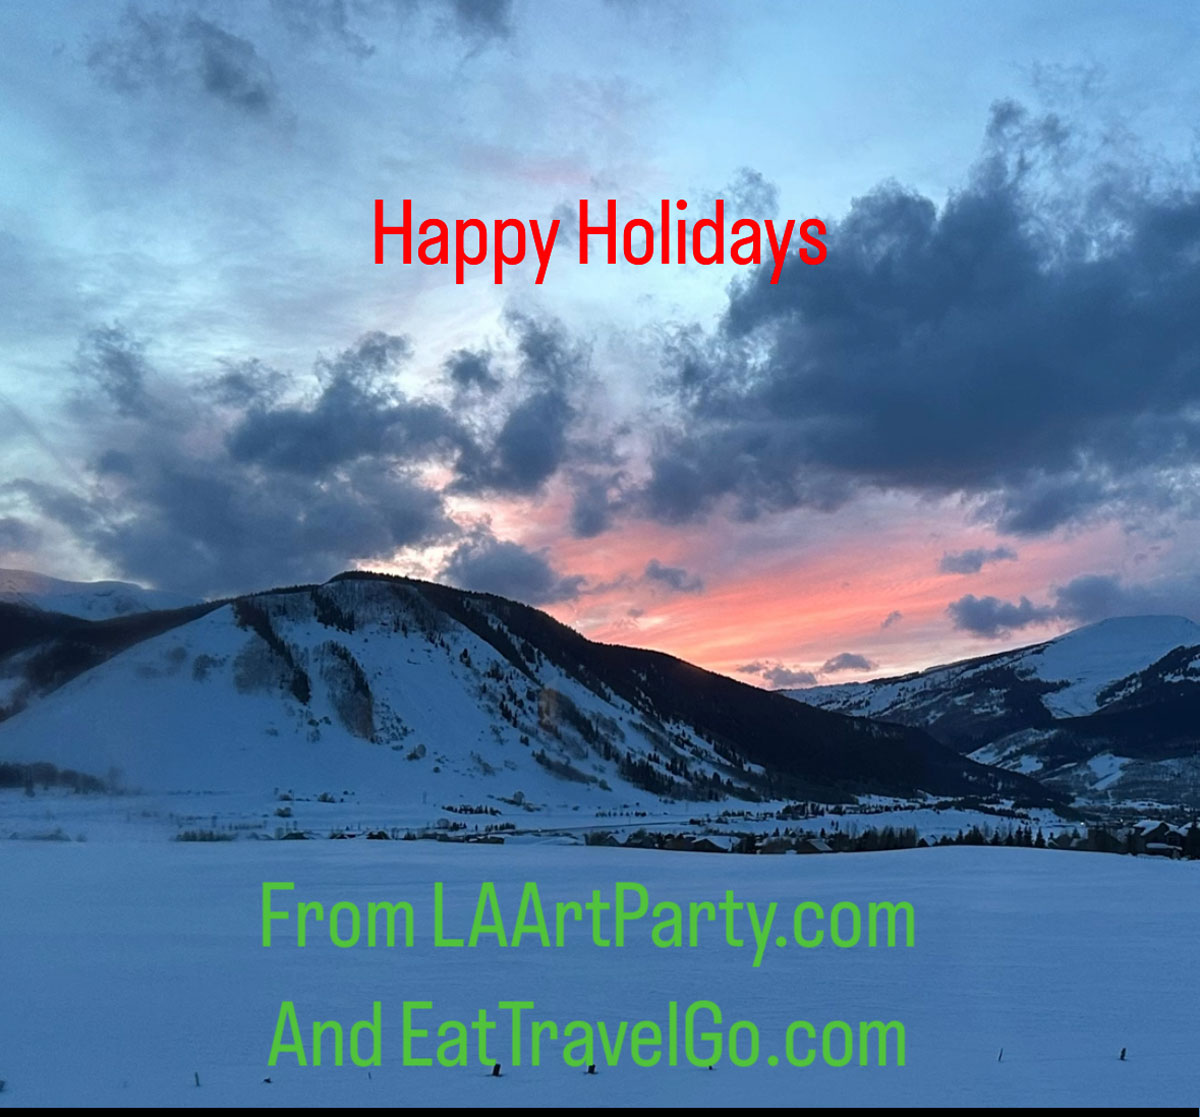 Happy Holidays from LAArtparty.com and EatTravelGo.com